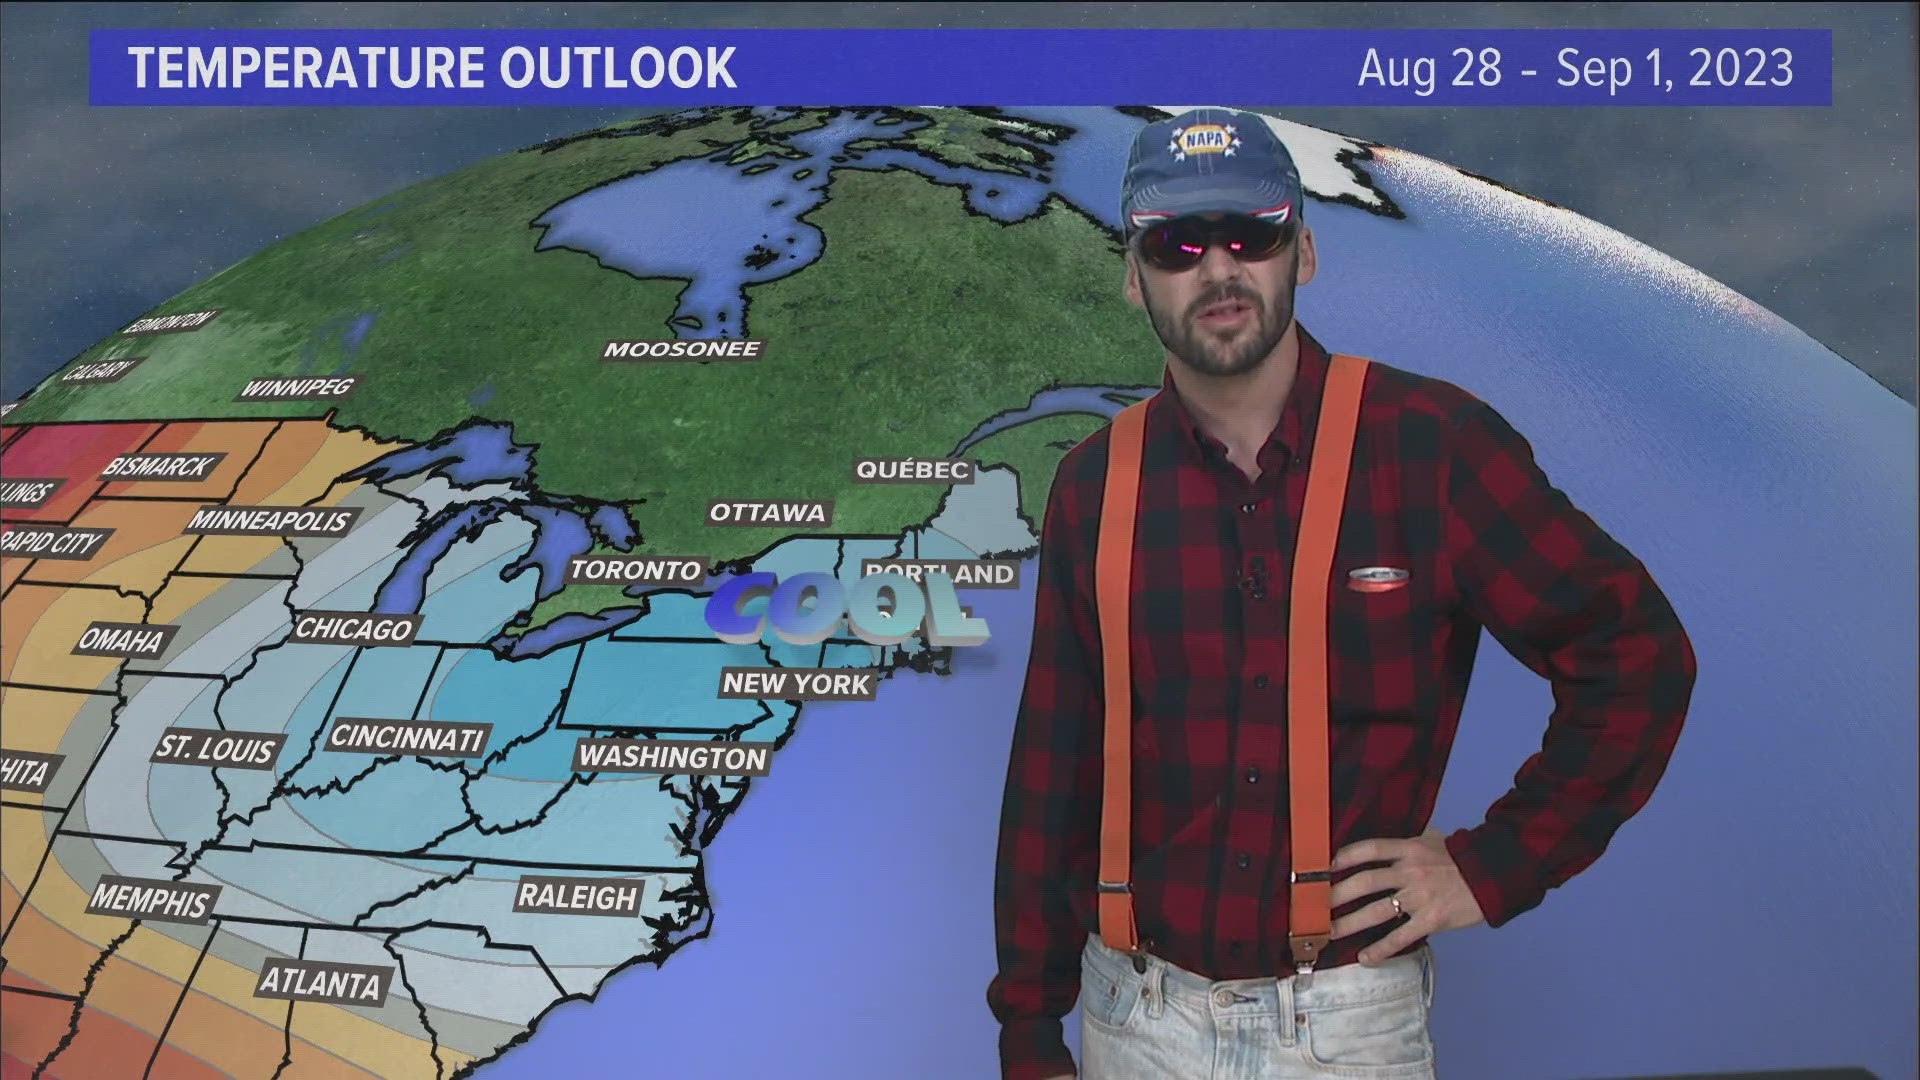 Donny Pelletier, Maine's finest athlete, shares an extended weather report.